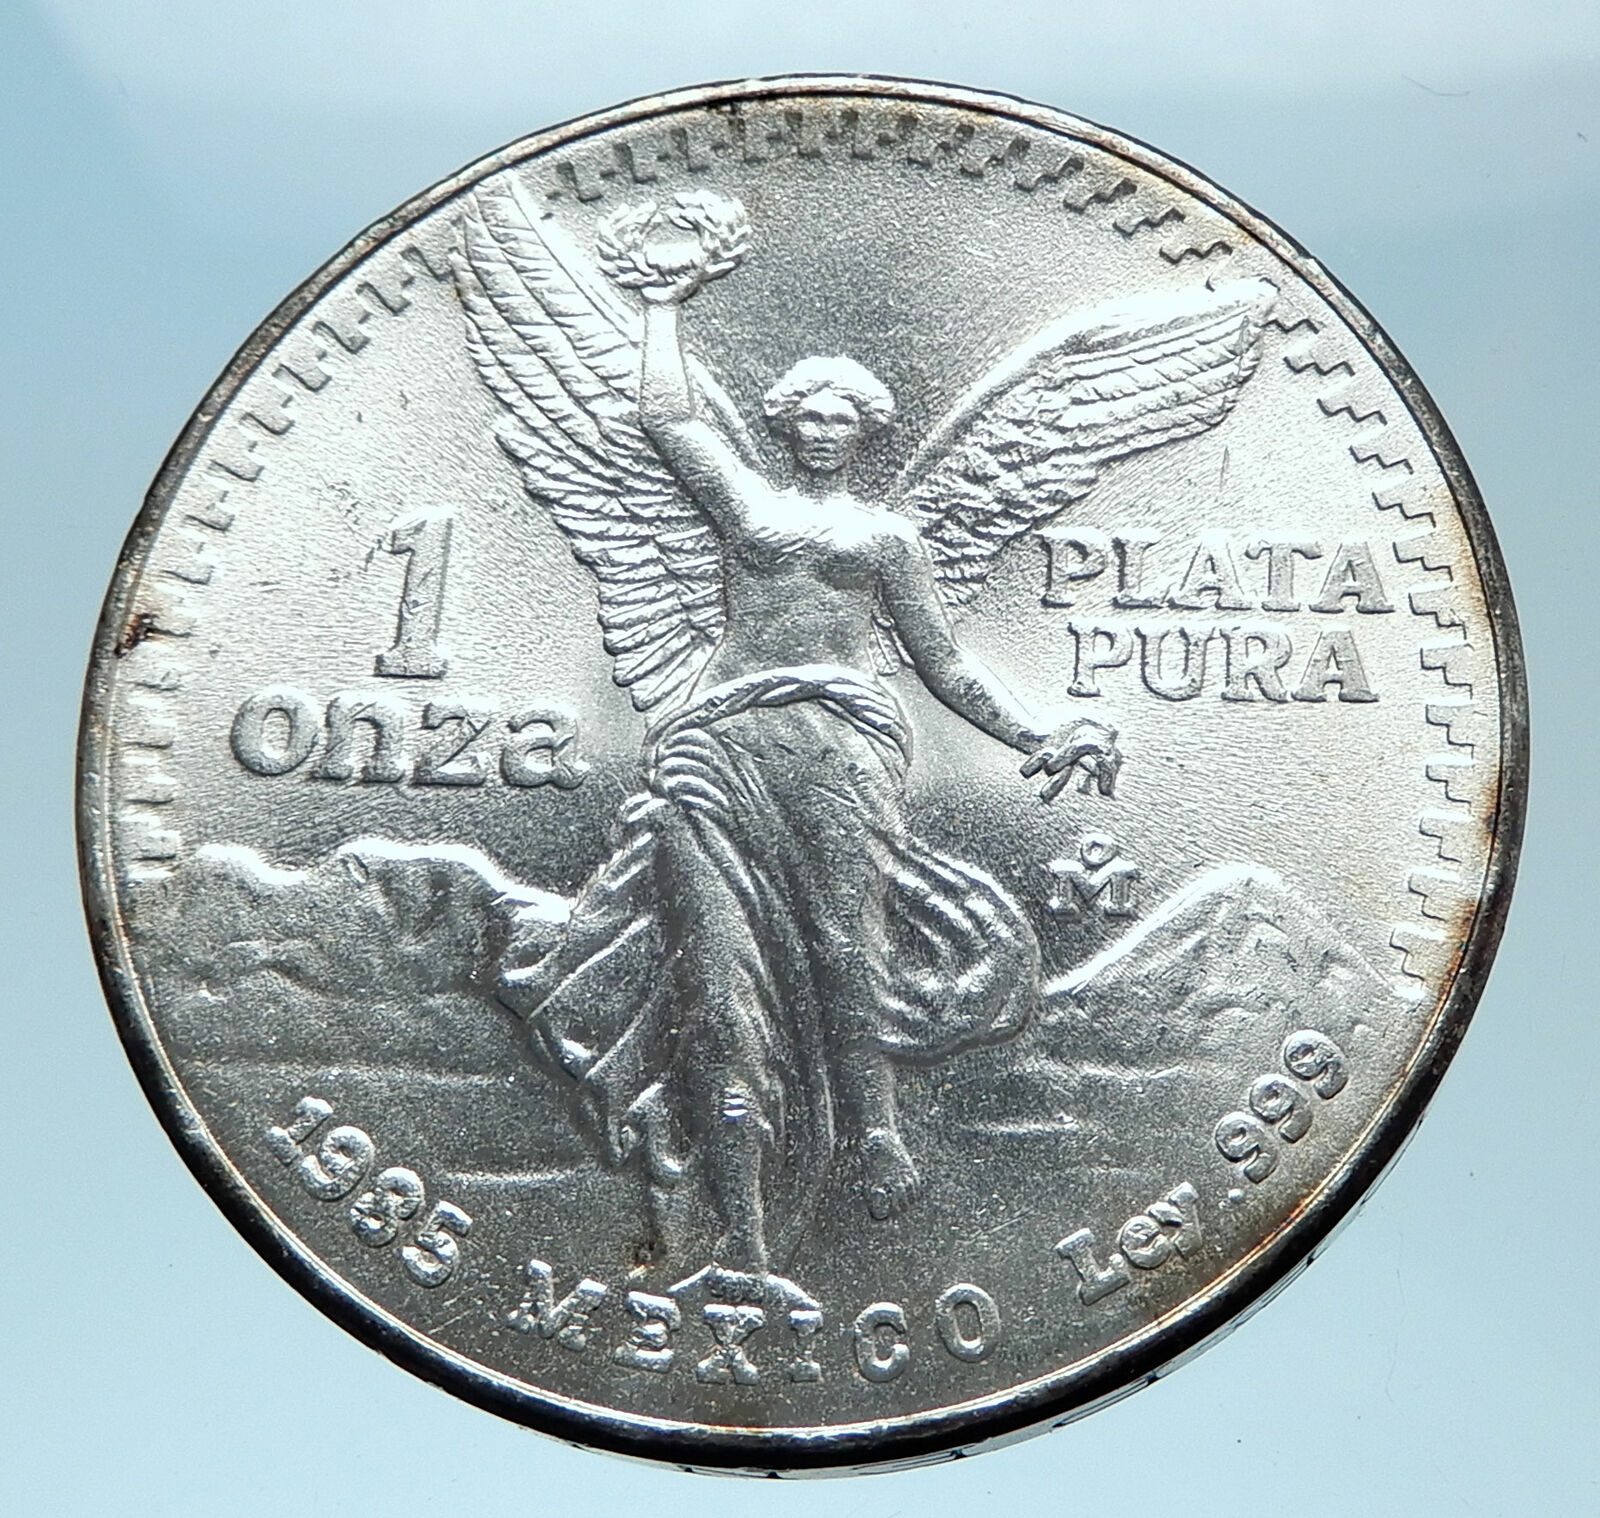 1984 MEXICO Large 3.6cm ONZA VICTORY EAGLE Troy Silver Ounce Mexican Coin i77941